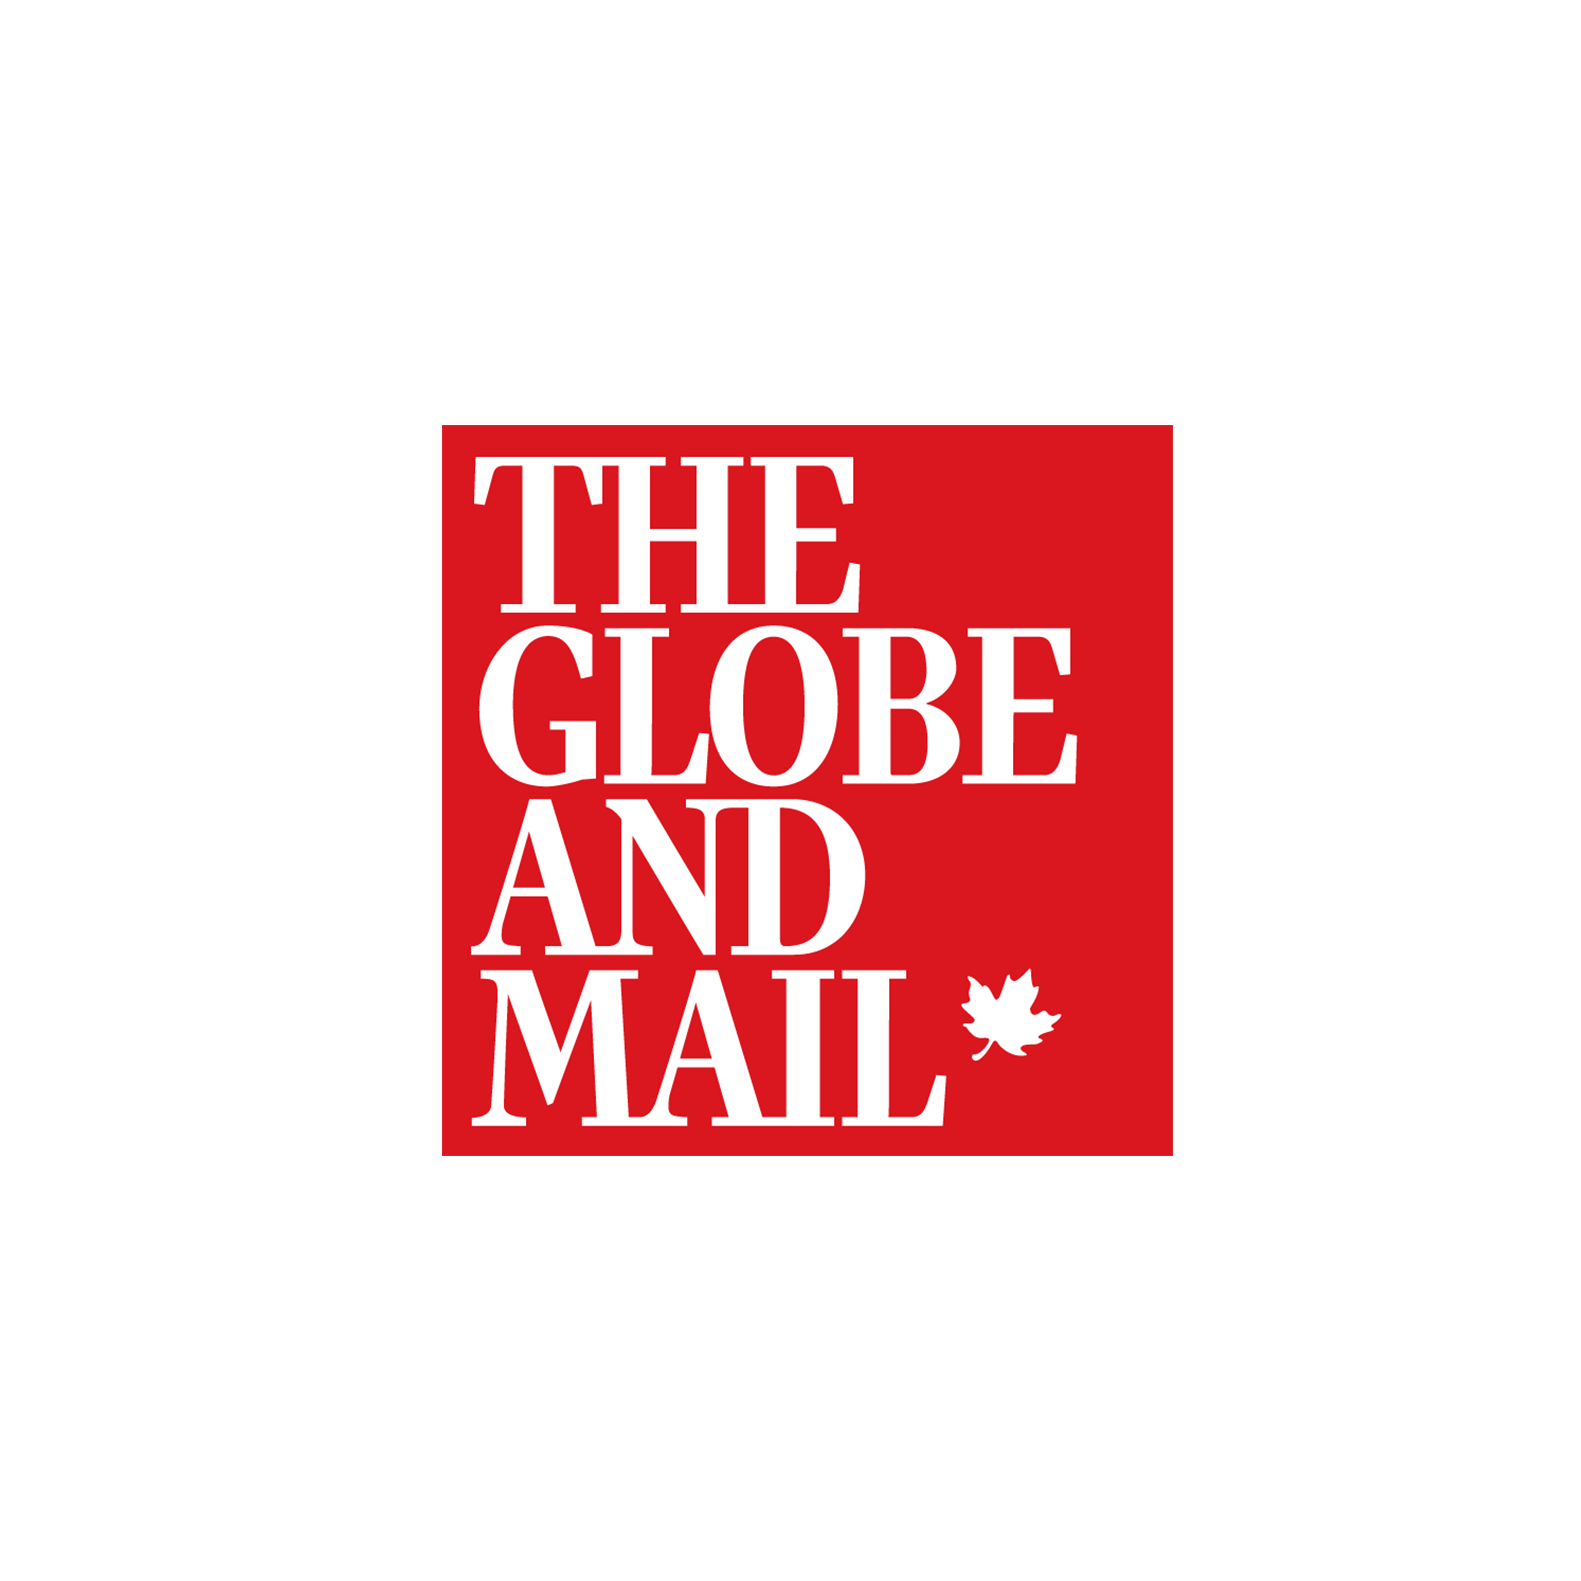 The globe and mail logo